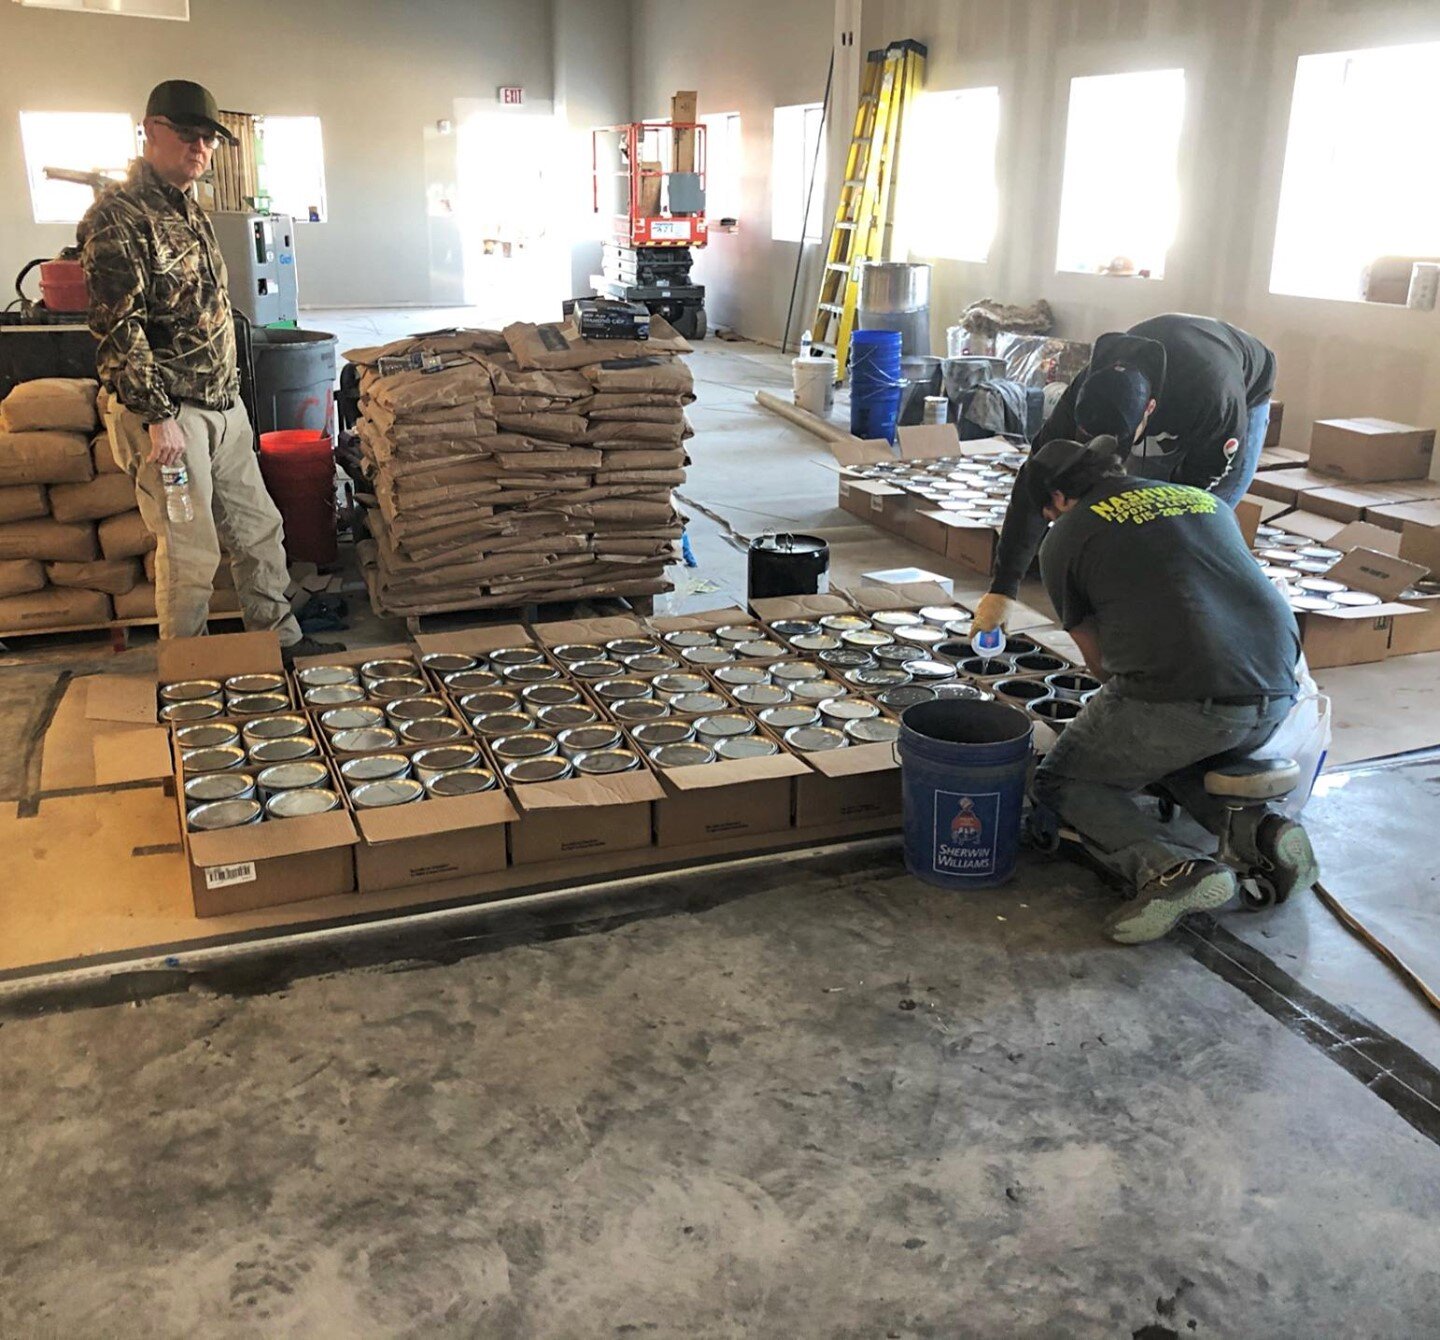 It's always nice to work with a good team but it's especially nice when you have this many cans to open 😉
˙
˙
˙
˙
˙
#nashvilleflooring #nashvilleflooringinc #urethaneconcrete #commercialflooring #commercialnashville #middletnflooring #localnashville